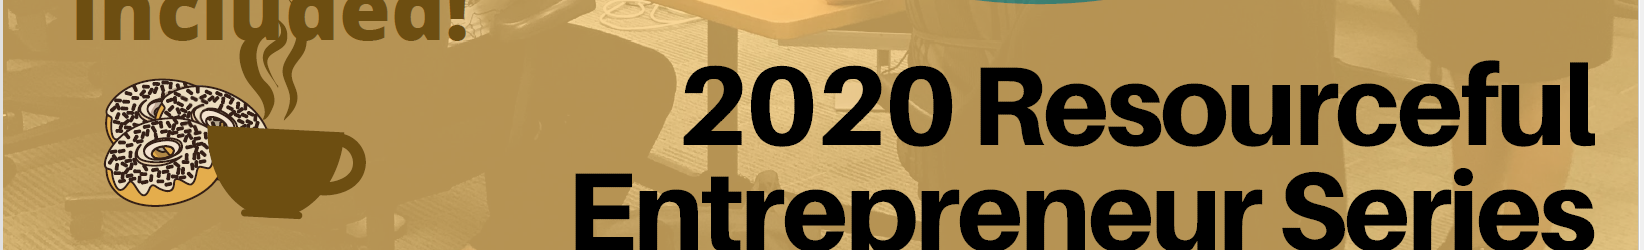 2020 Resourceful Entrepreneur Series (Cancelled)